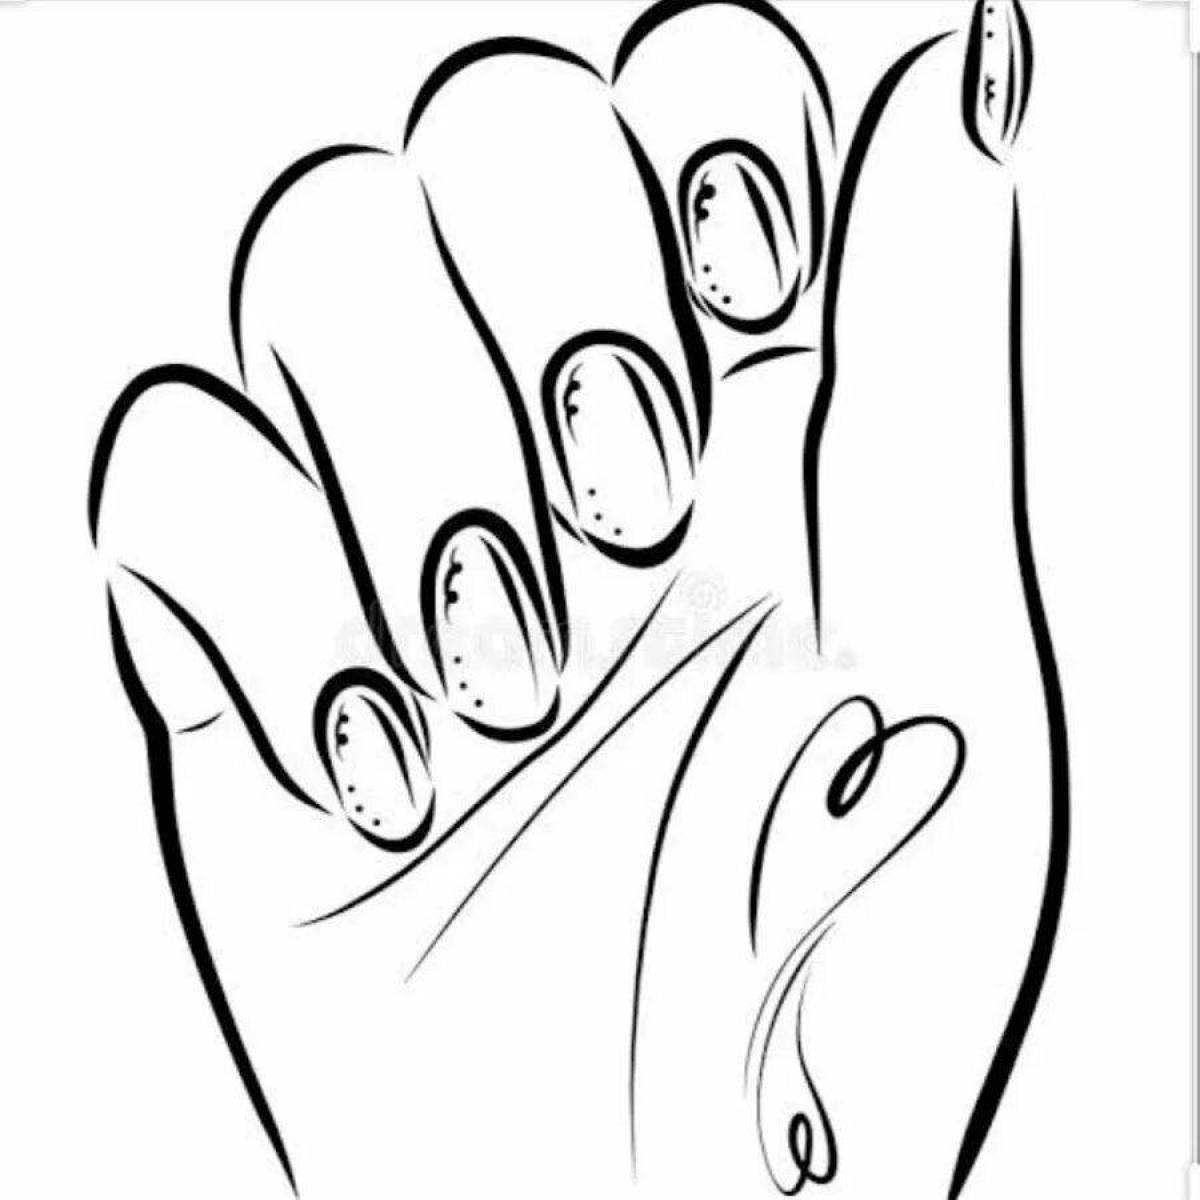 Gourmet hand manicure coloring page